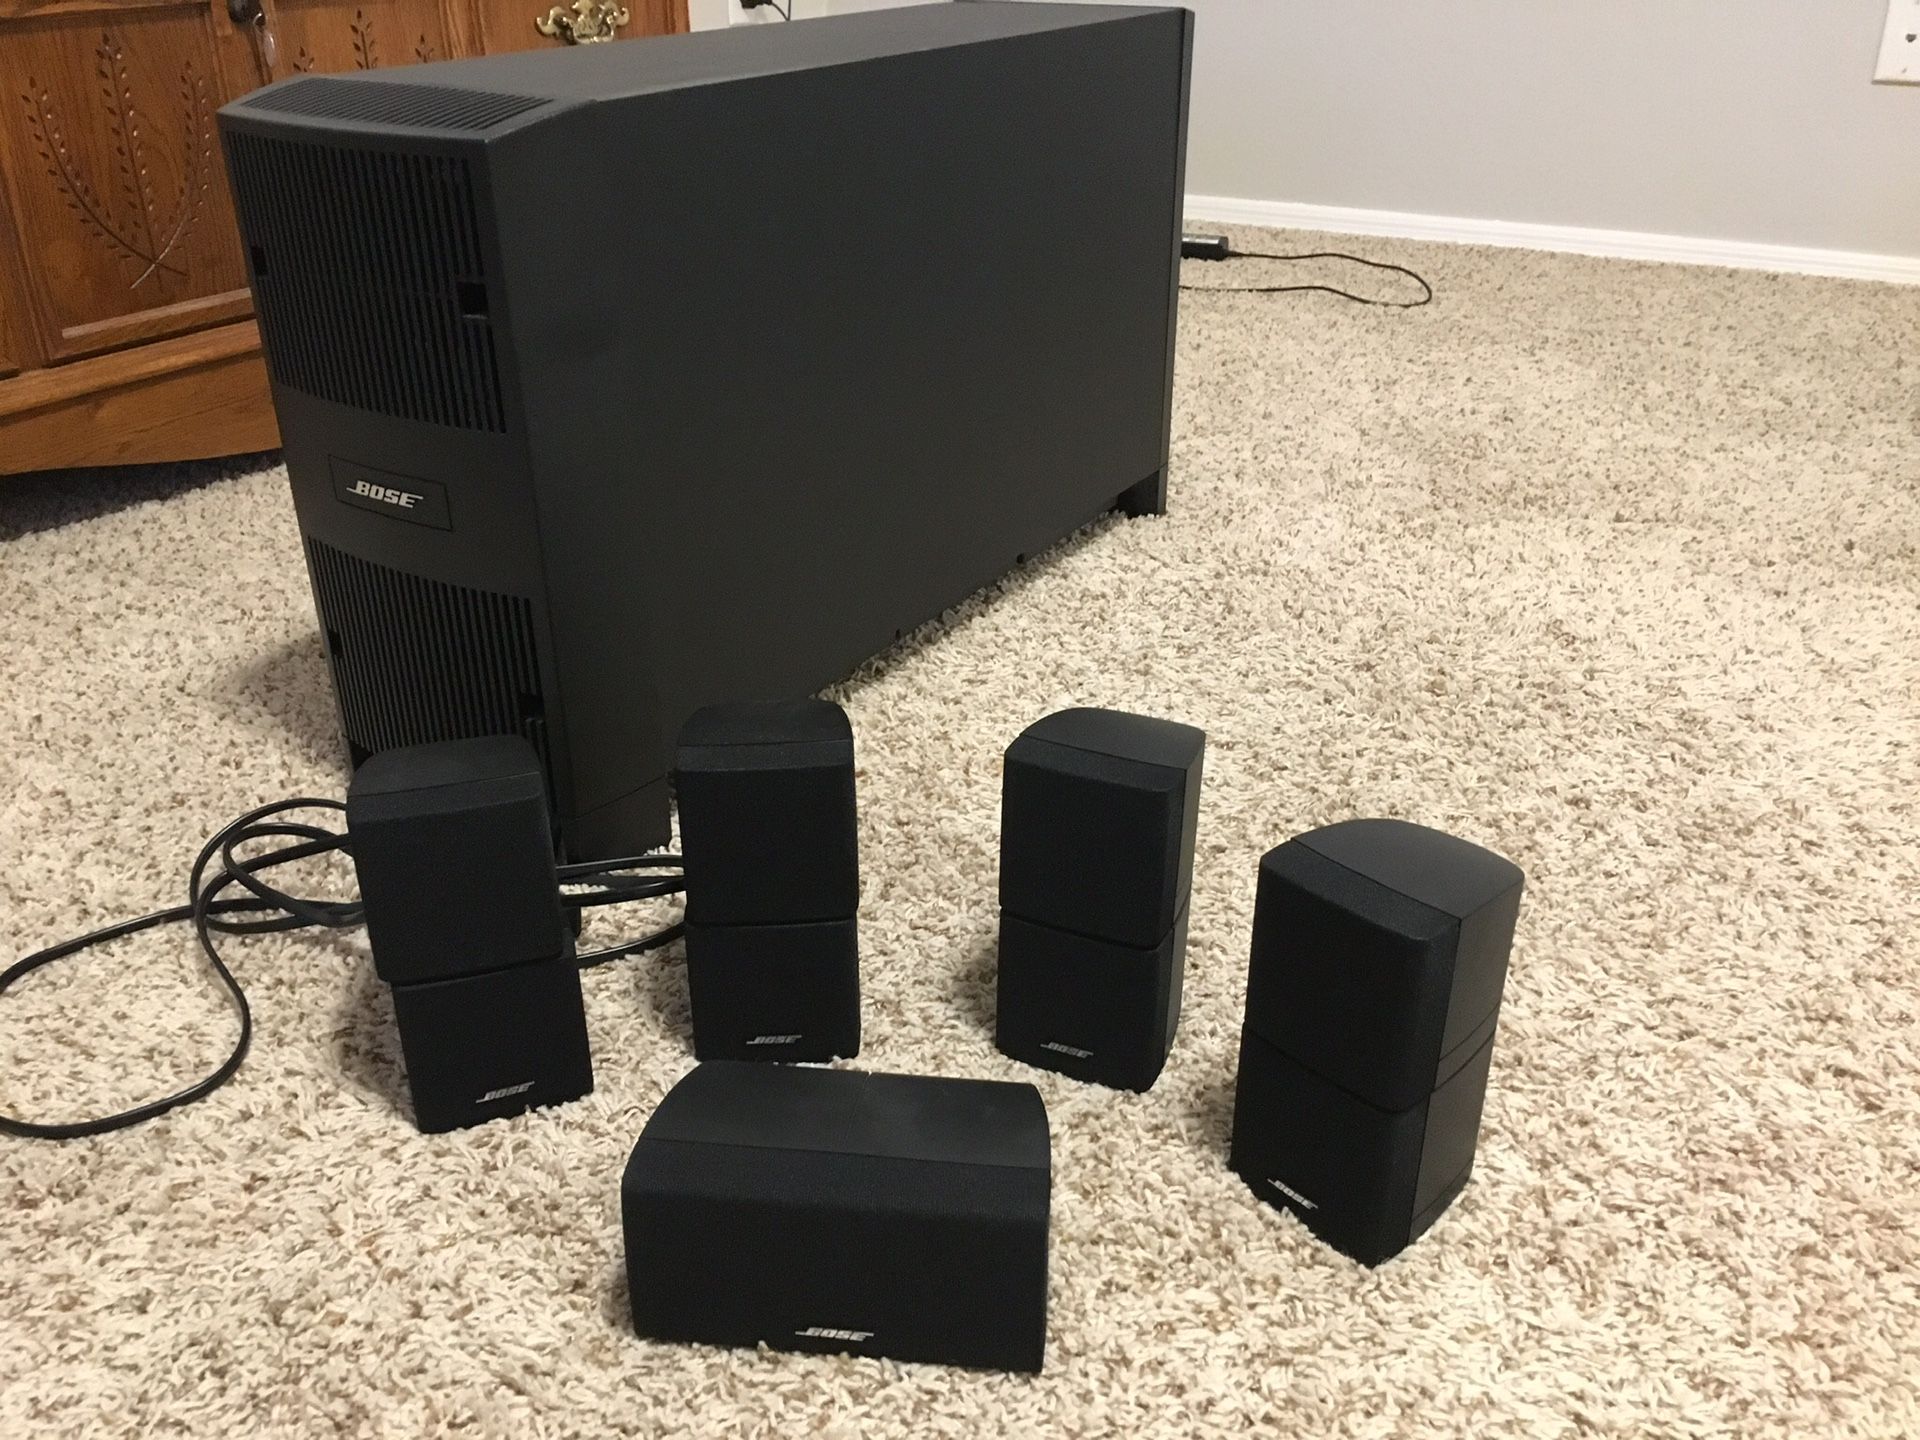 6.1 Bose Acoustimass® 16 Series II home entertainment speaker system